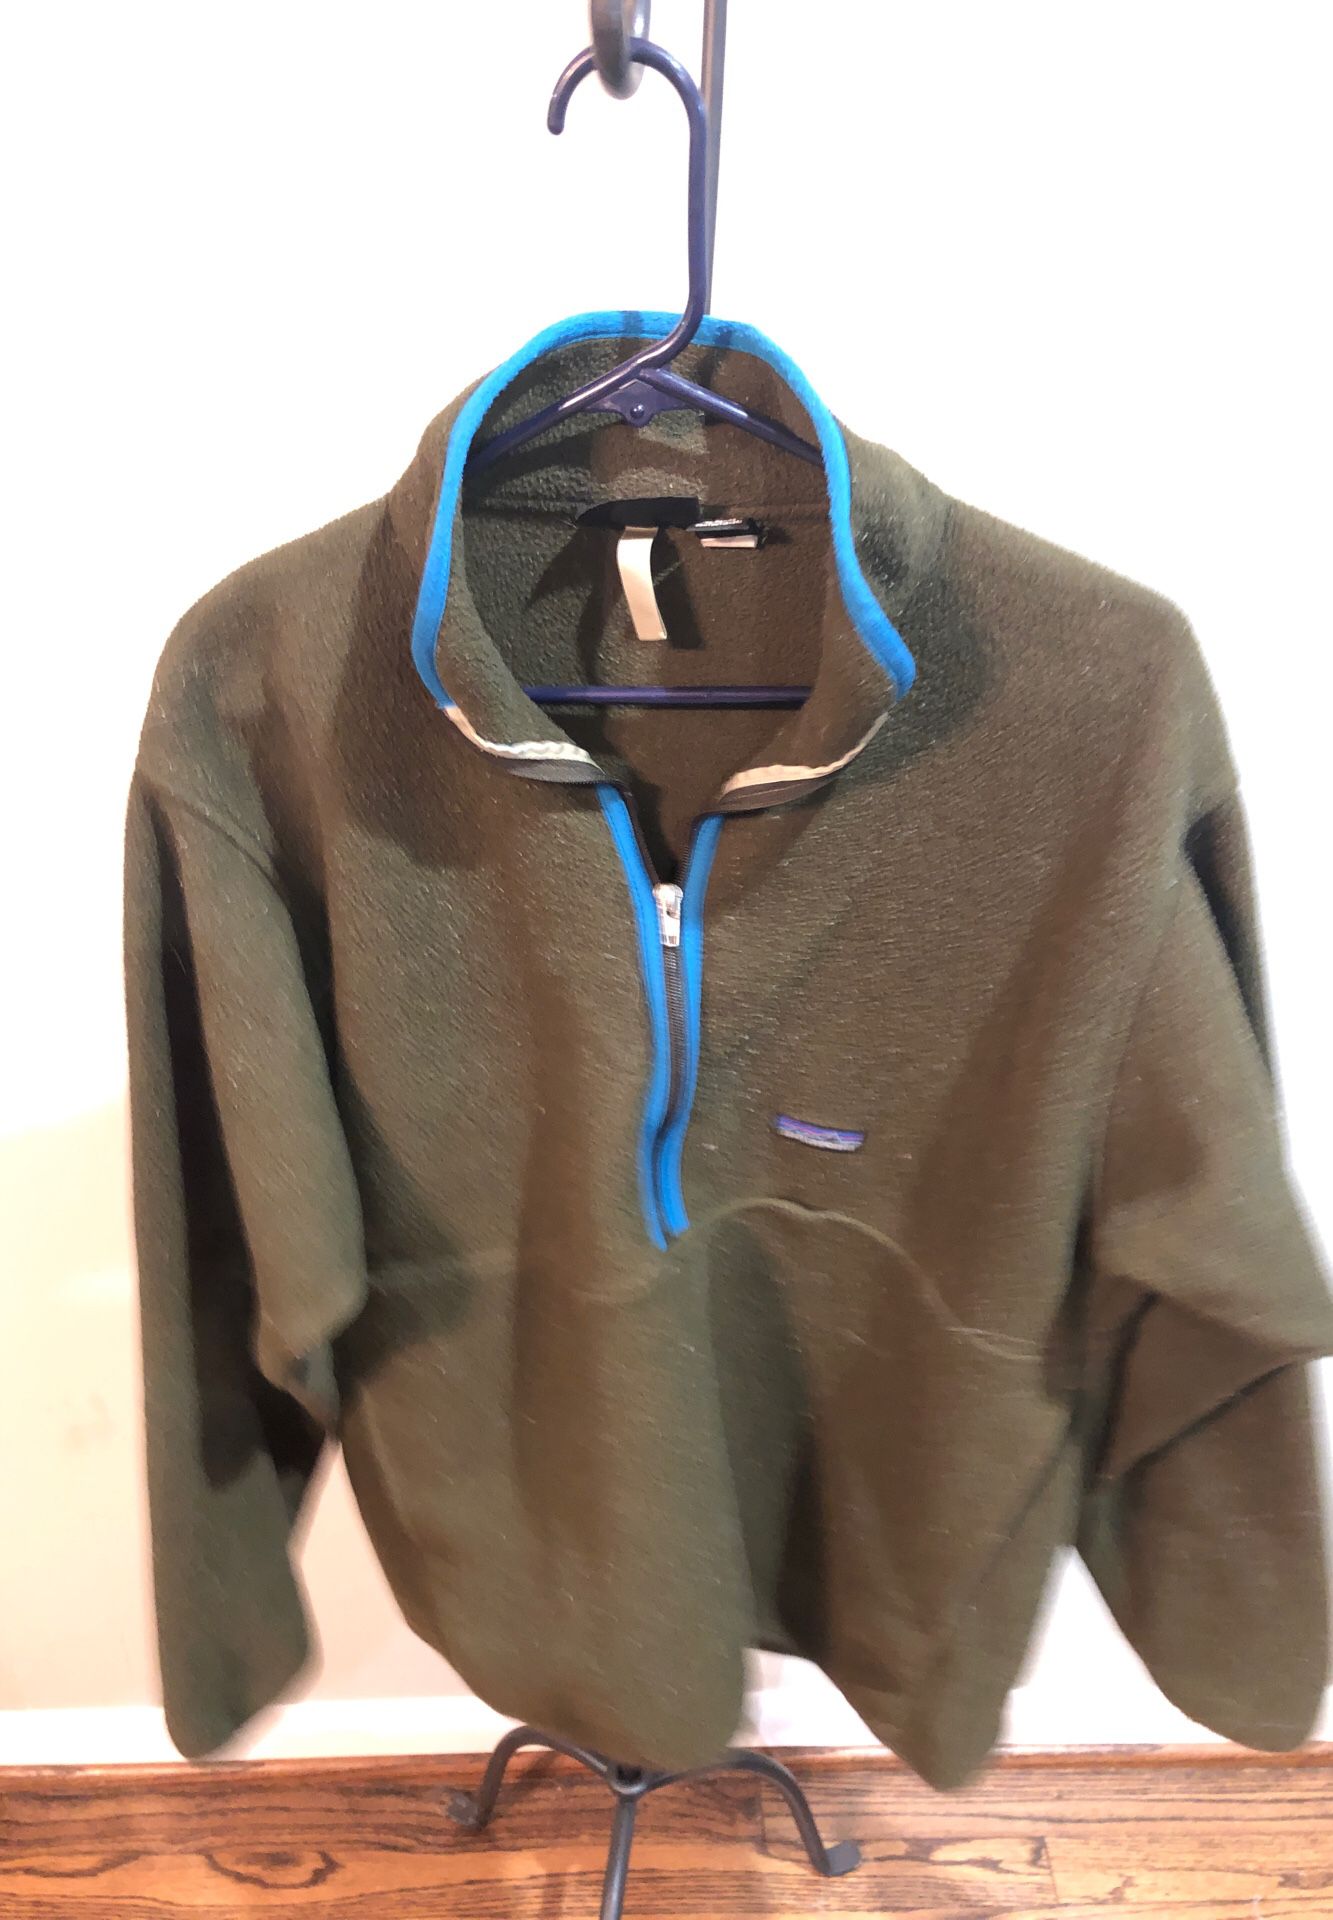 Patagonia Synchilla long-sleeved 1/2 zip fleece pullover